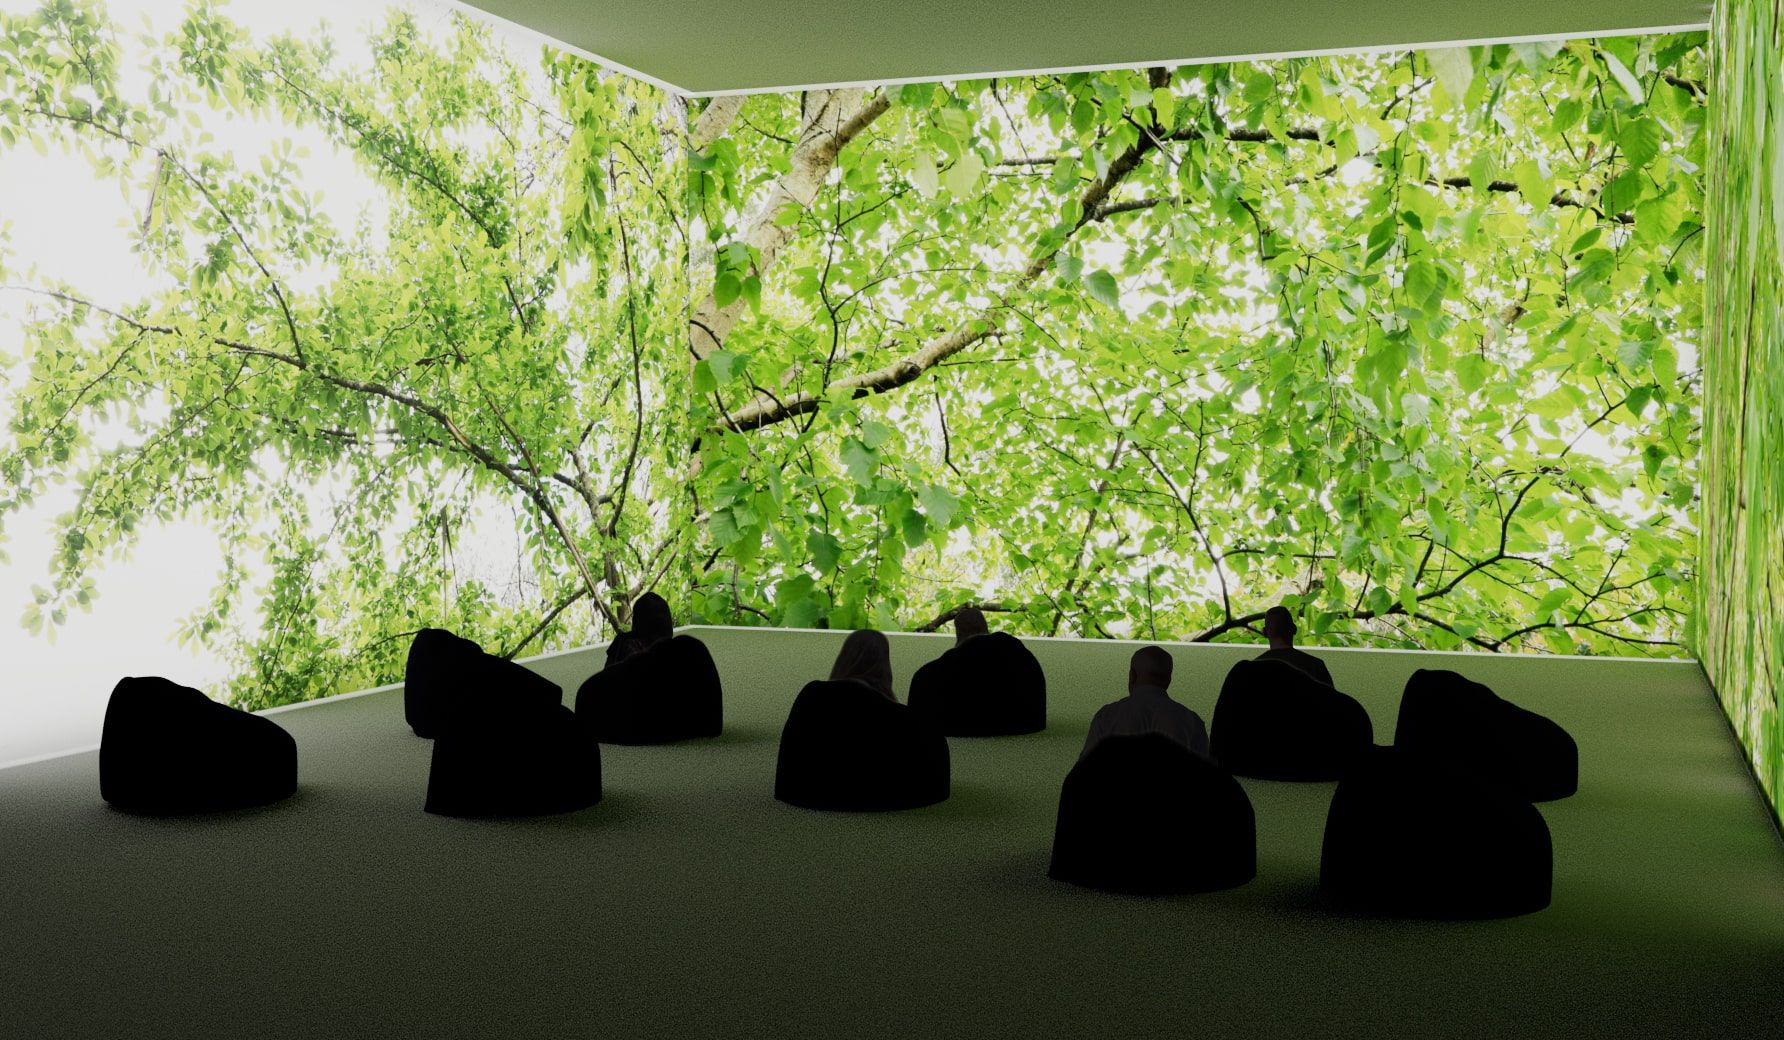 A room with screens for walls shows images of tree branches  while people sit on beanbags to watch 